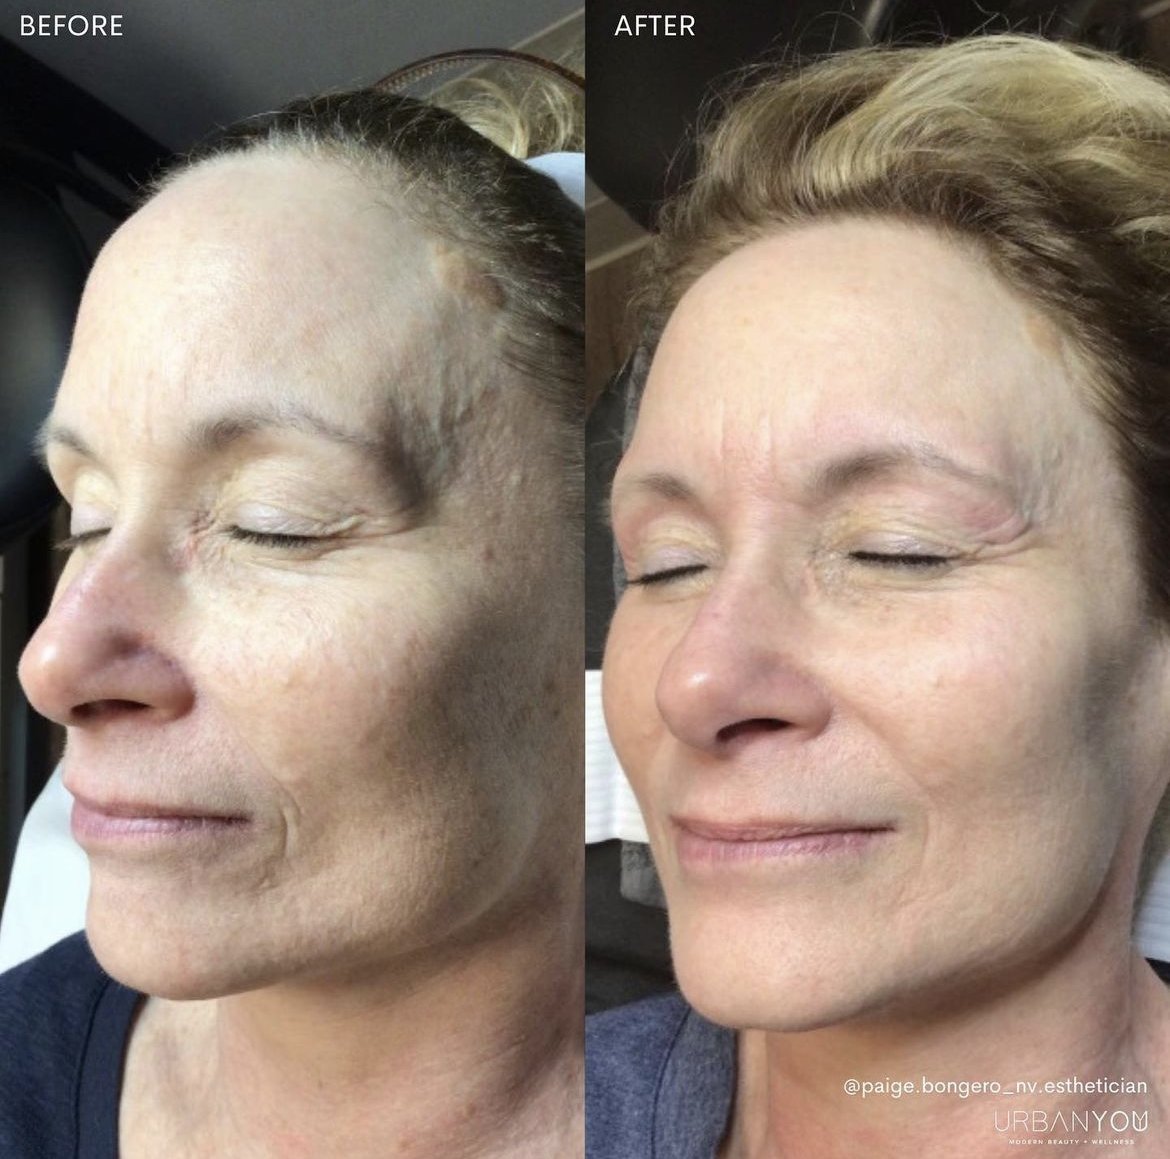 Moxi laser treatment before and after Instagram, The Urban You Medical Spa in Northville, Michigan